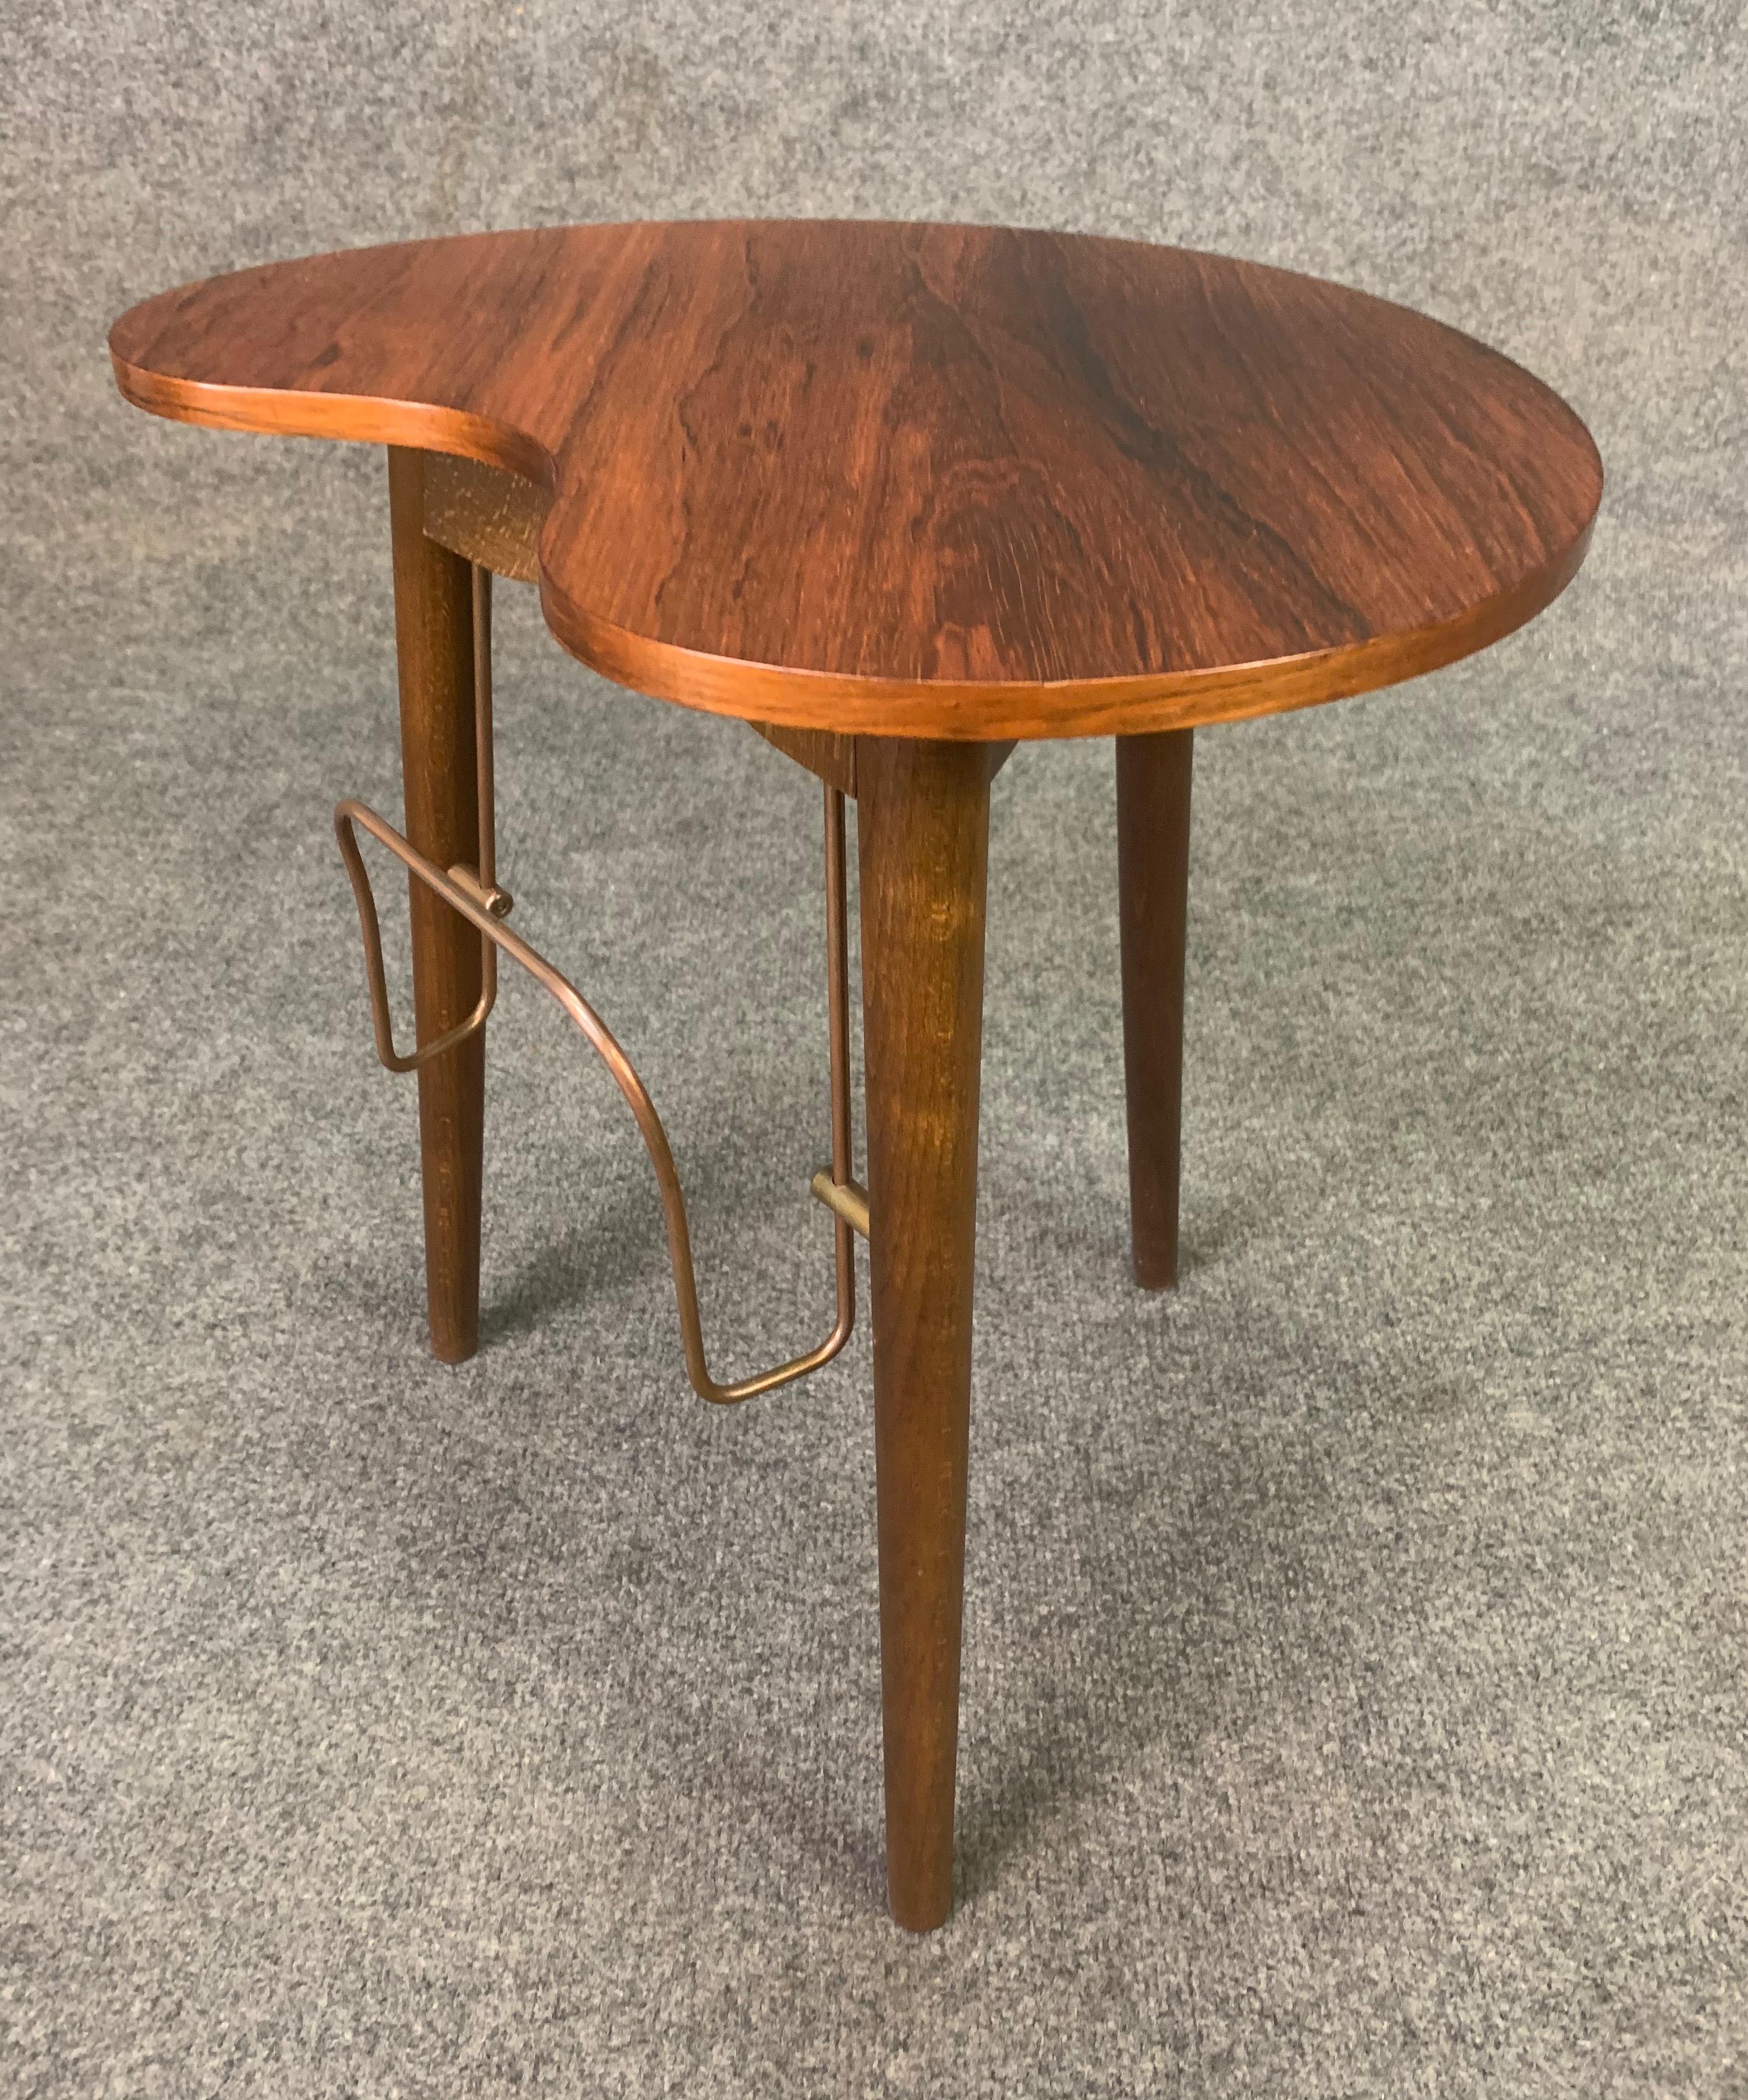 Here is a rare and special Scandinavian Modern side table in rosewood manufactured by Gorm Mobler in Denmark in the 1960s.
This table features an organic kidney shape, a top with vibrant wood grain, three solid wood tapered legs and a book